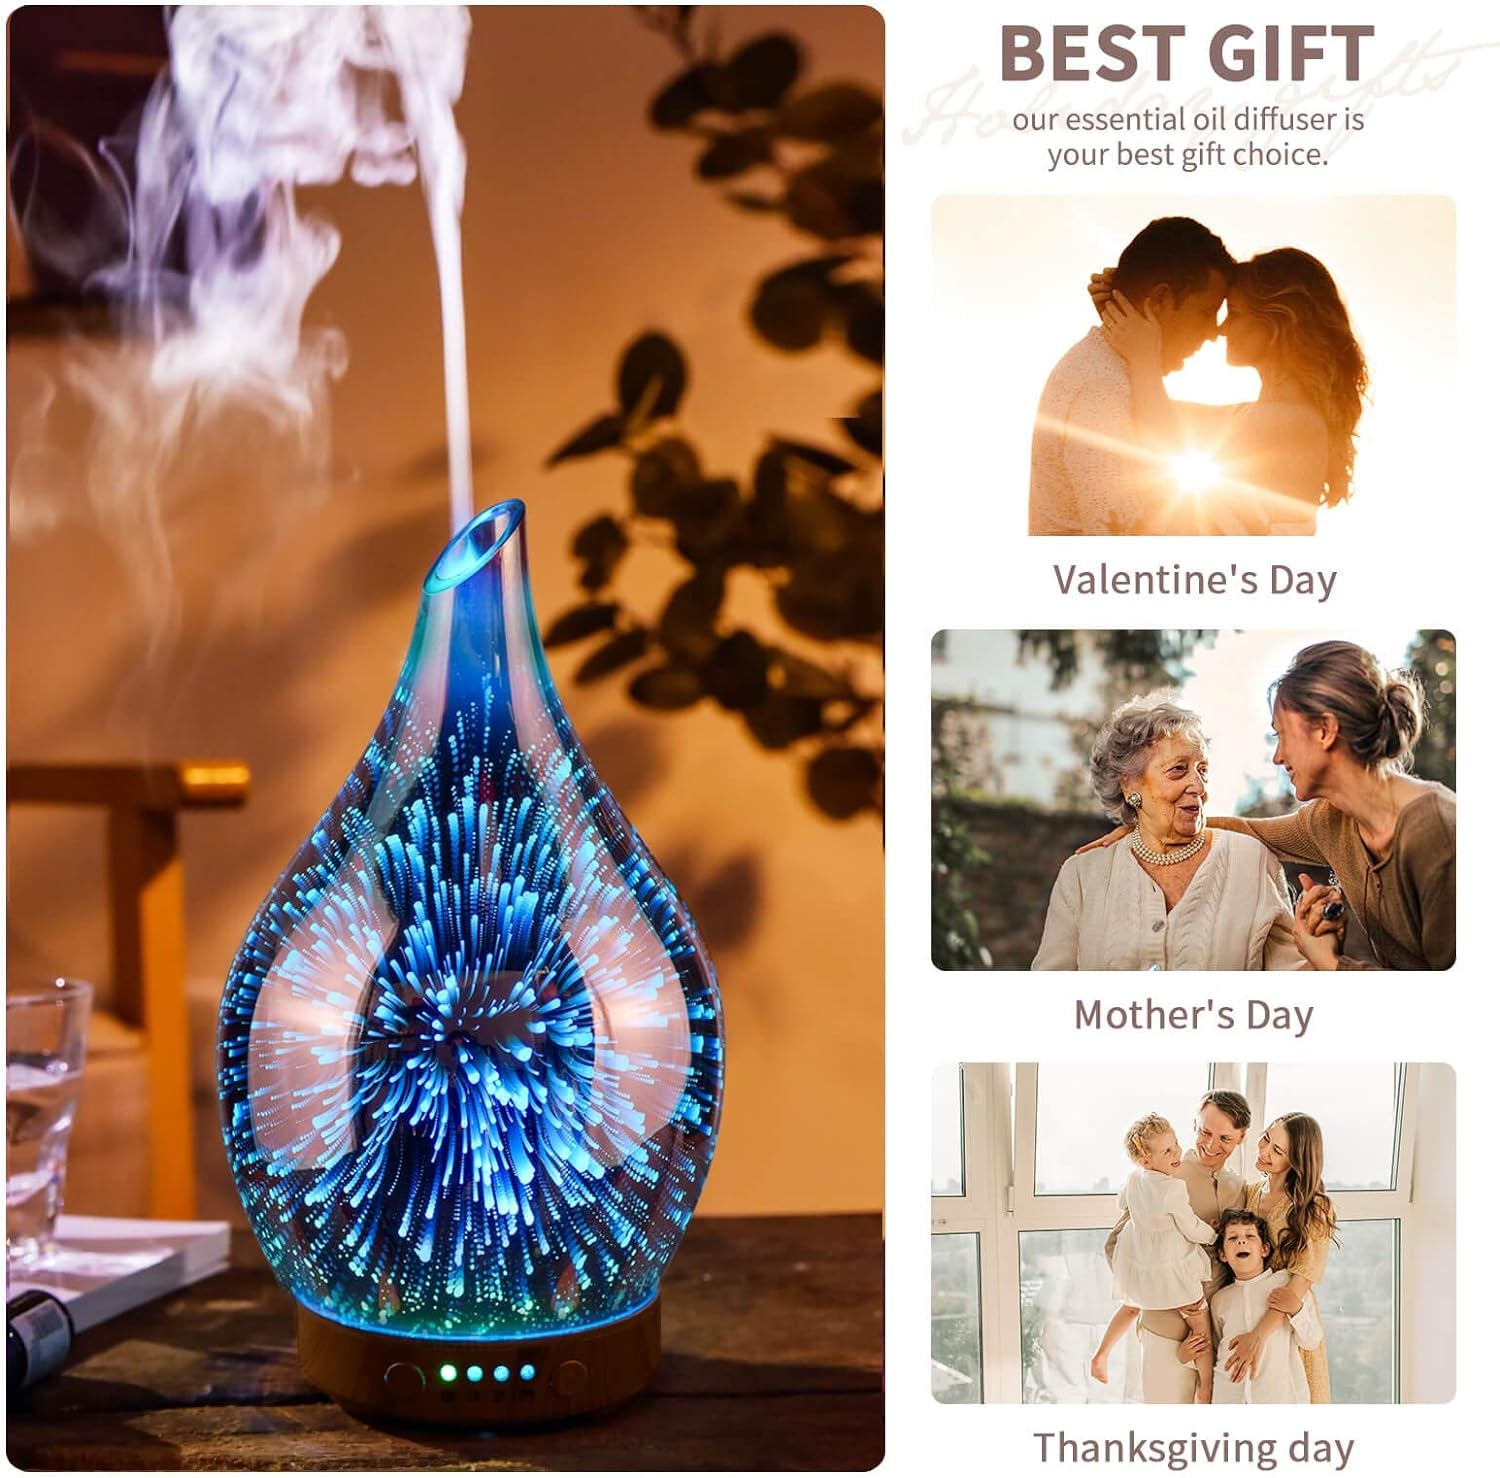 Oil Diffuser 3D Glass Aromatherapy Ultrasonic Humidifier, Air Refresh Auto Shut-Off, Timer Setting, BPA Free for Home Hotel Yoga Leisure SPA Gift 100Ml Last 4H